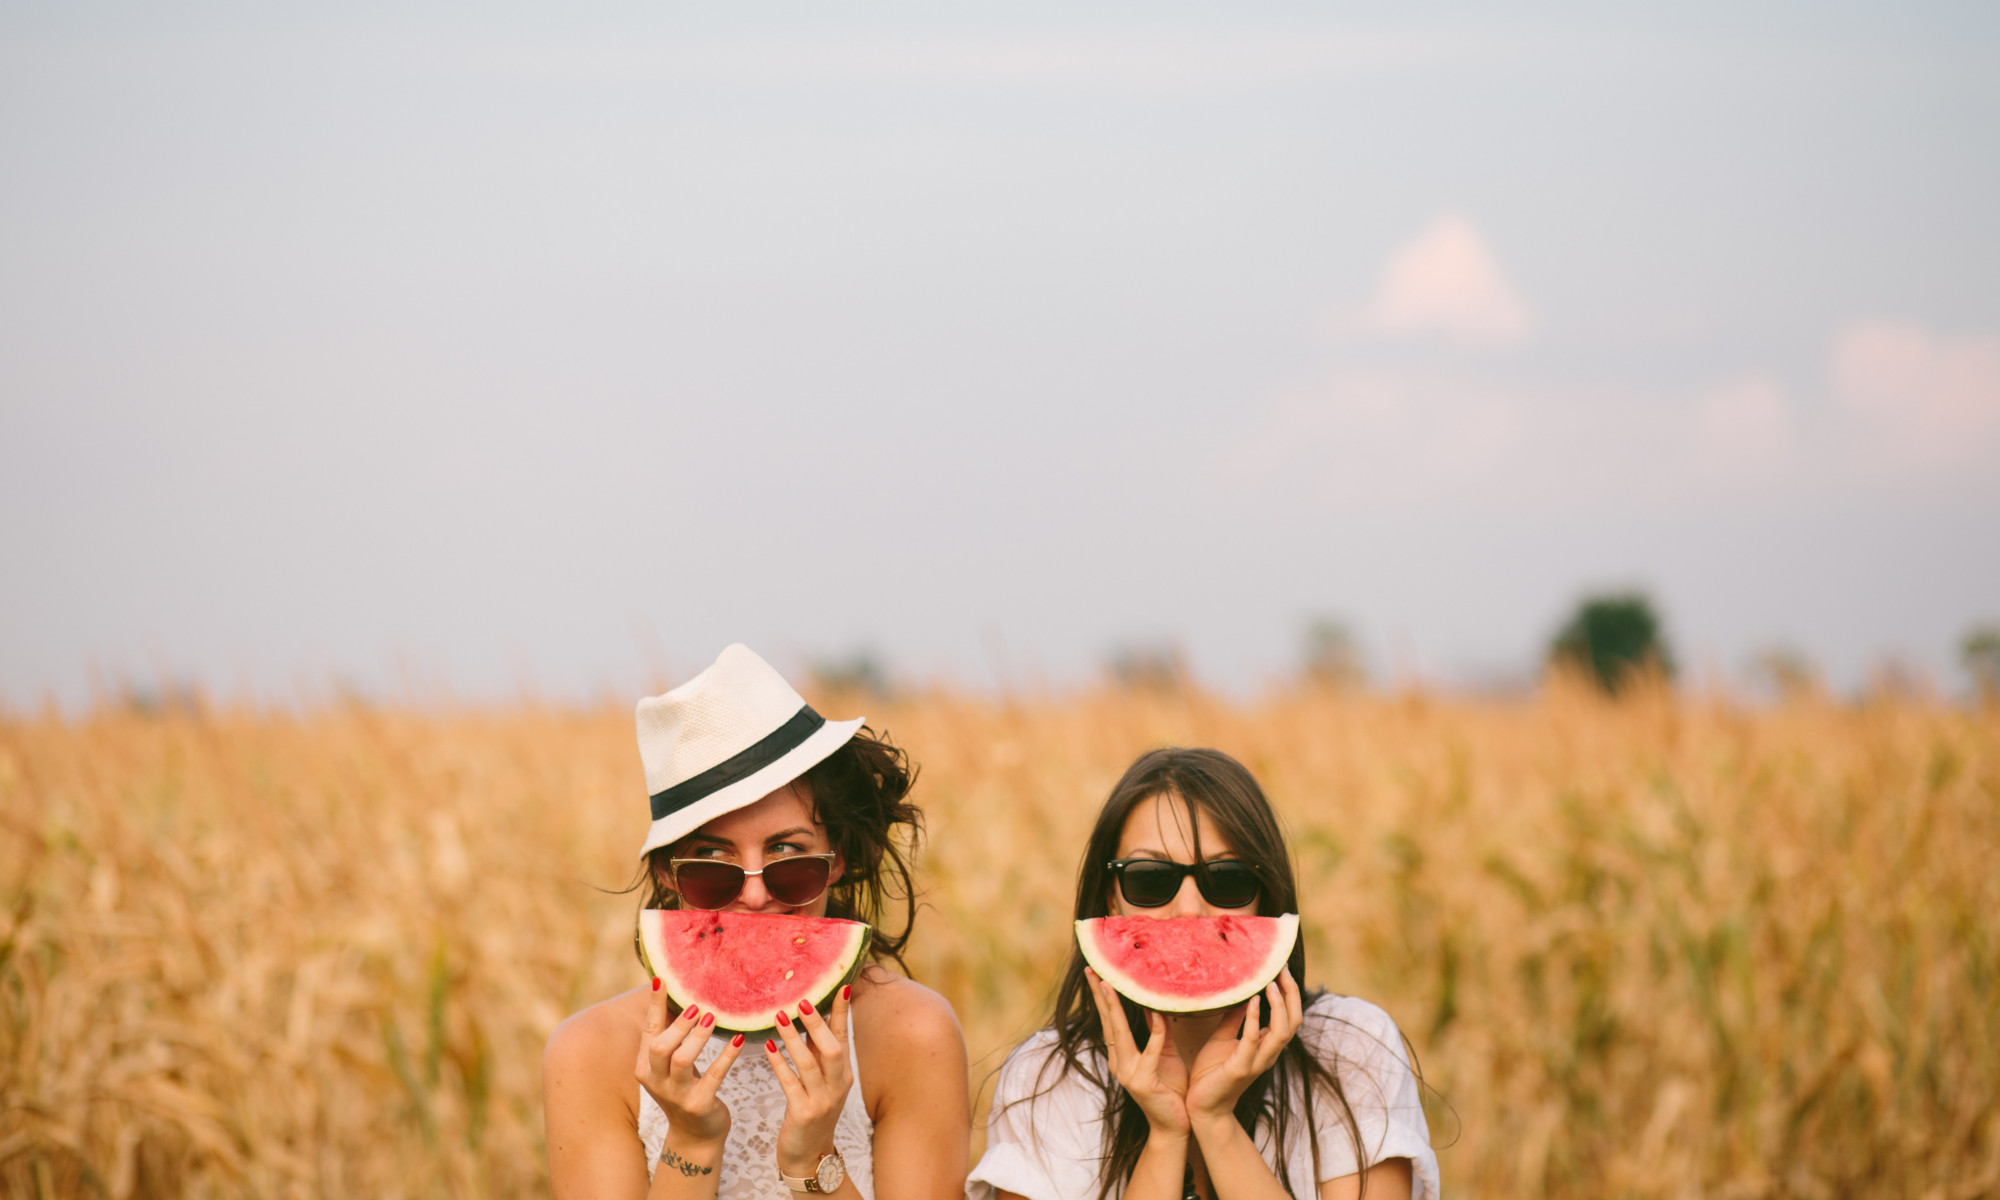 Girls in a field with slices